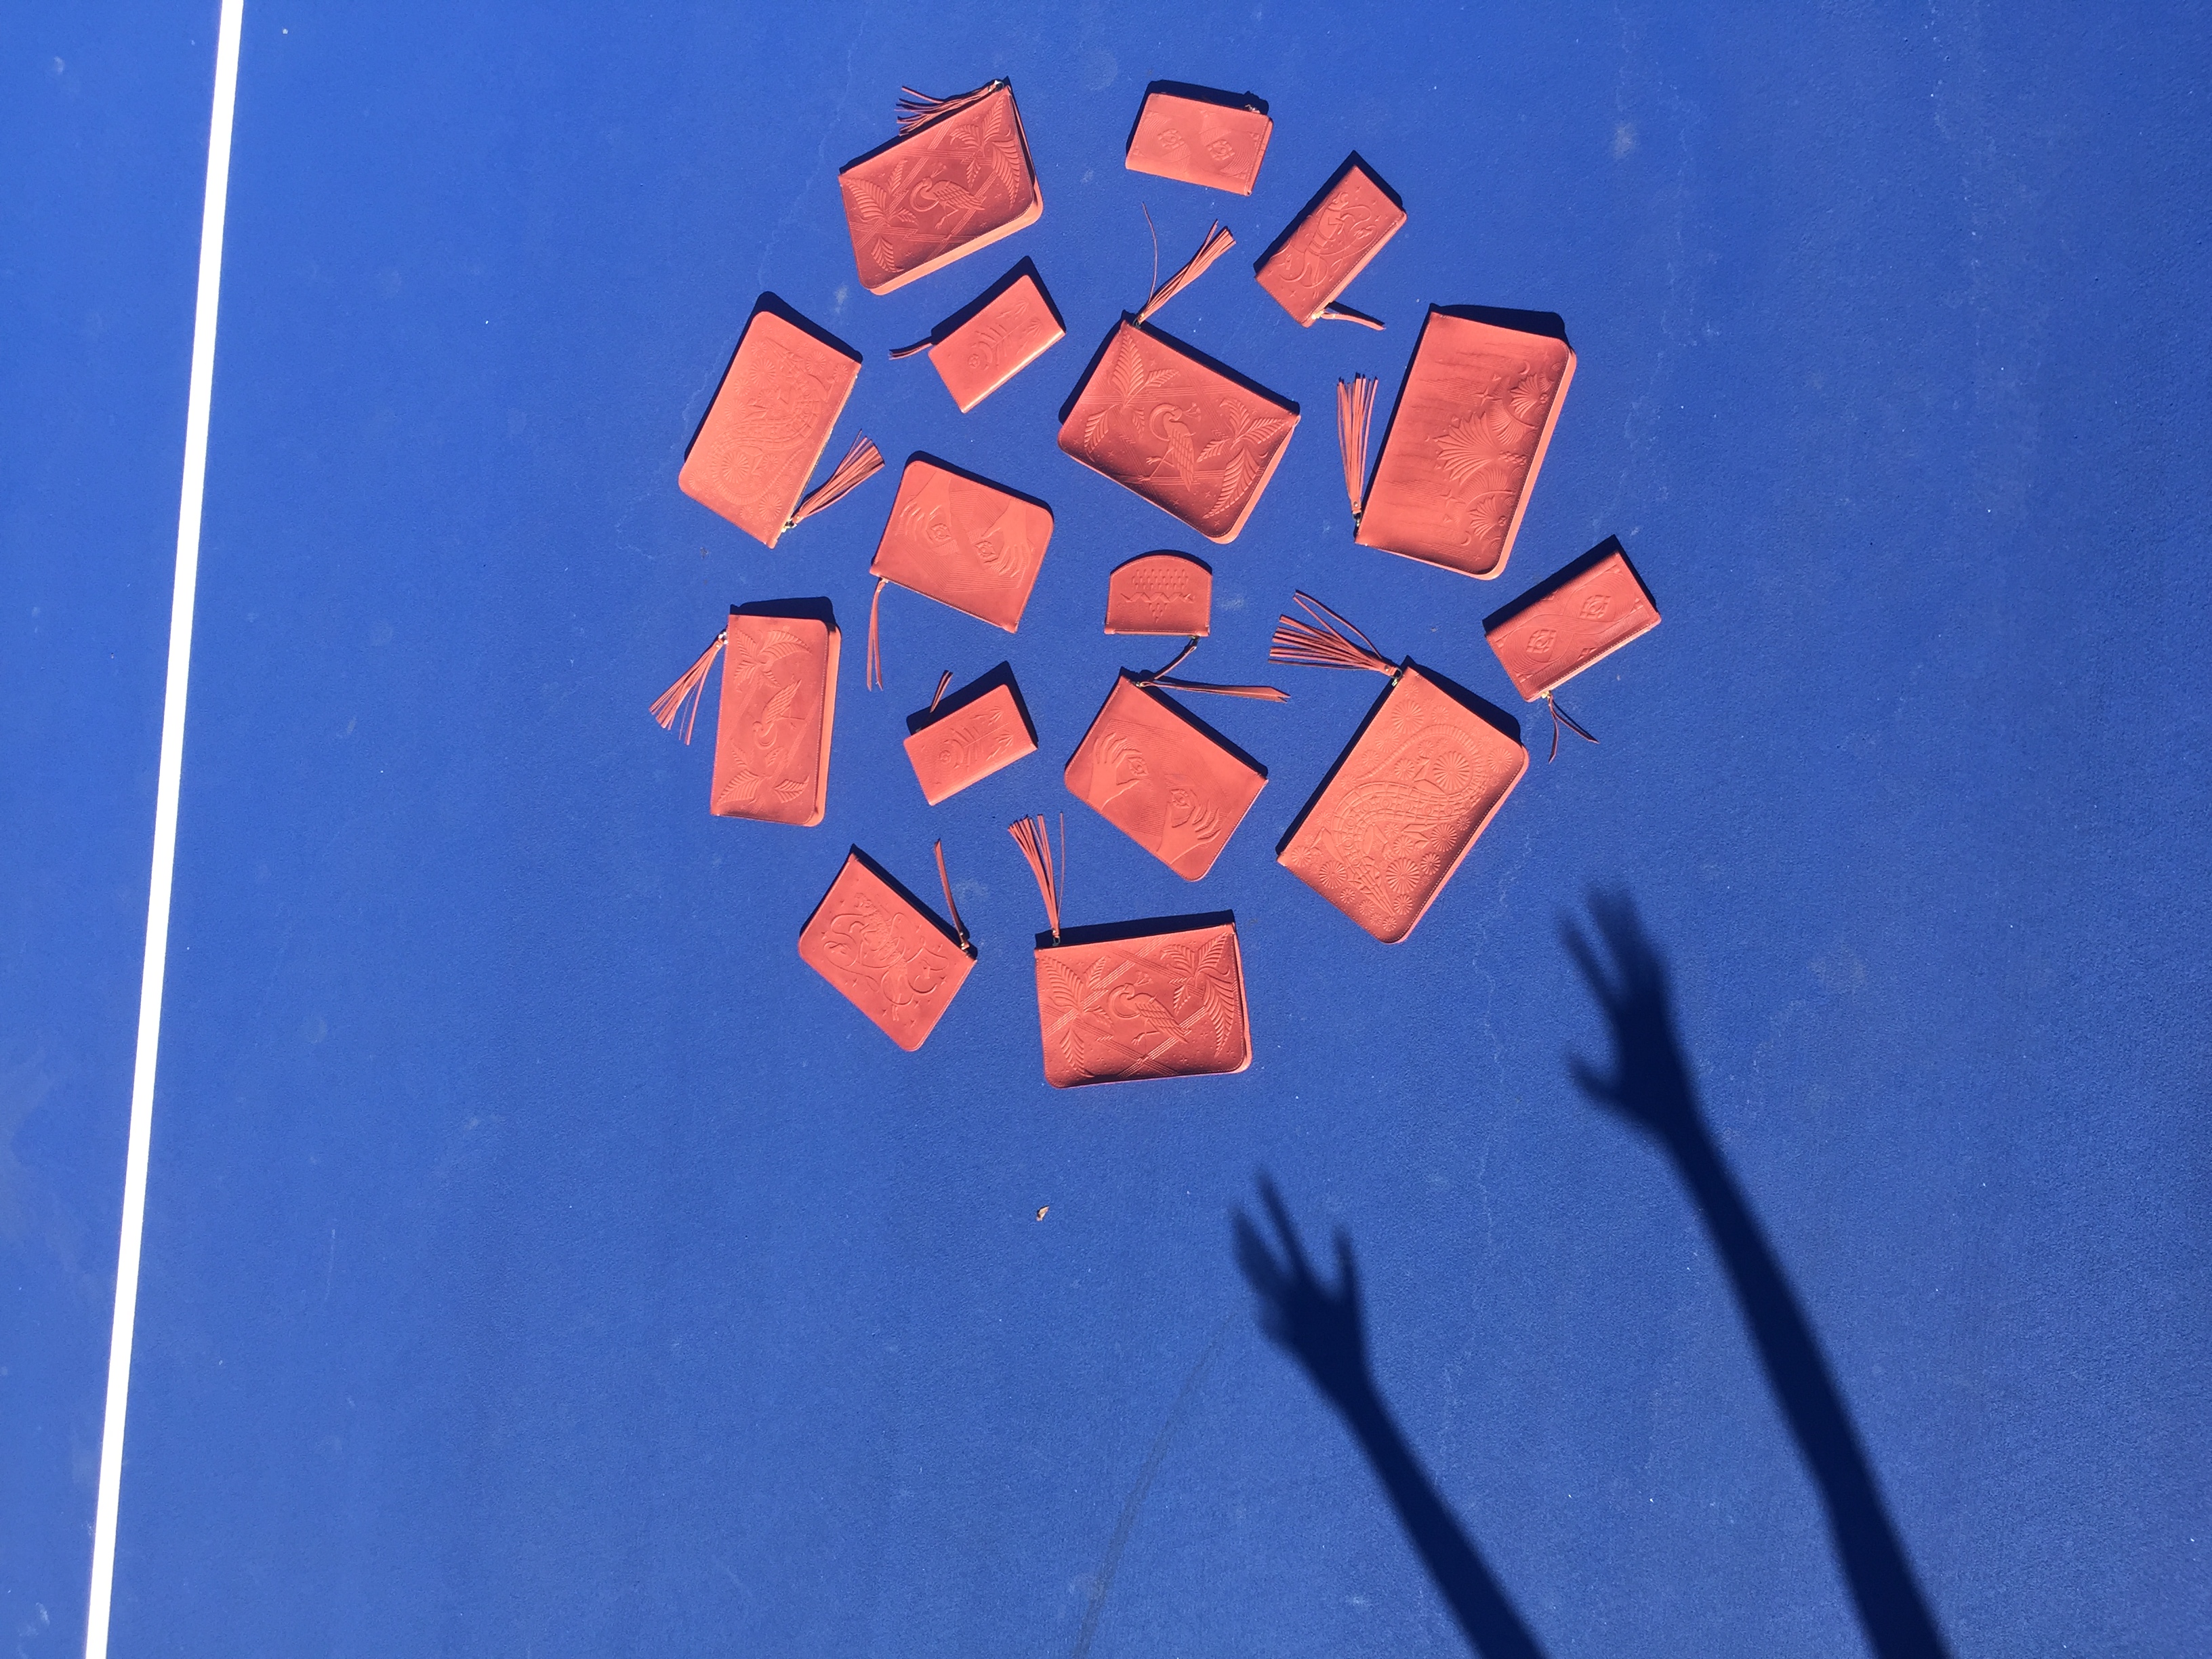 Several red wallets and clutches placed in a circle and photographed on a blue colored floor which looks like it could be a tennis court. On the left side of the frame is a shadow of two arms, which look like they tossed the red wallets and clutches on the tennis court. 